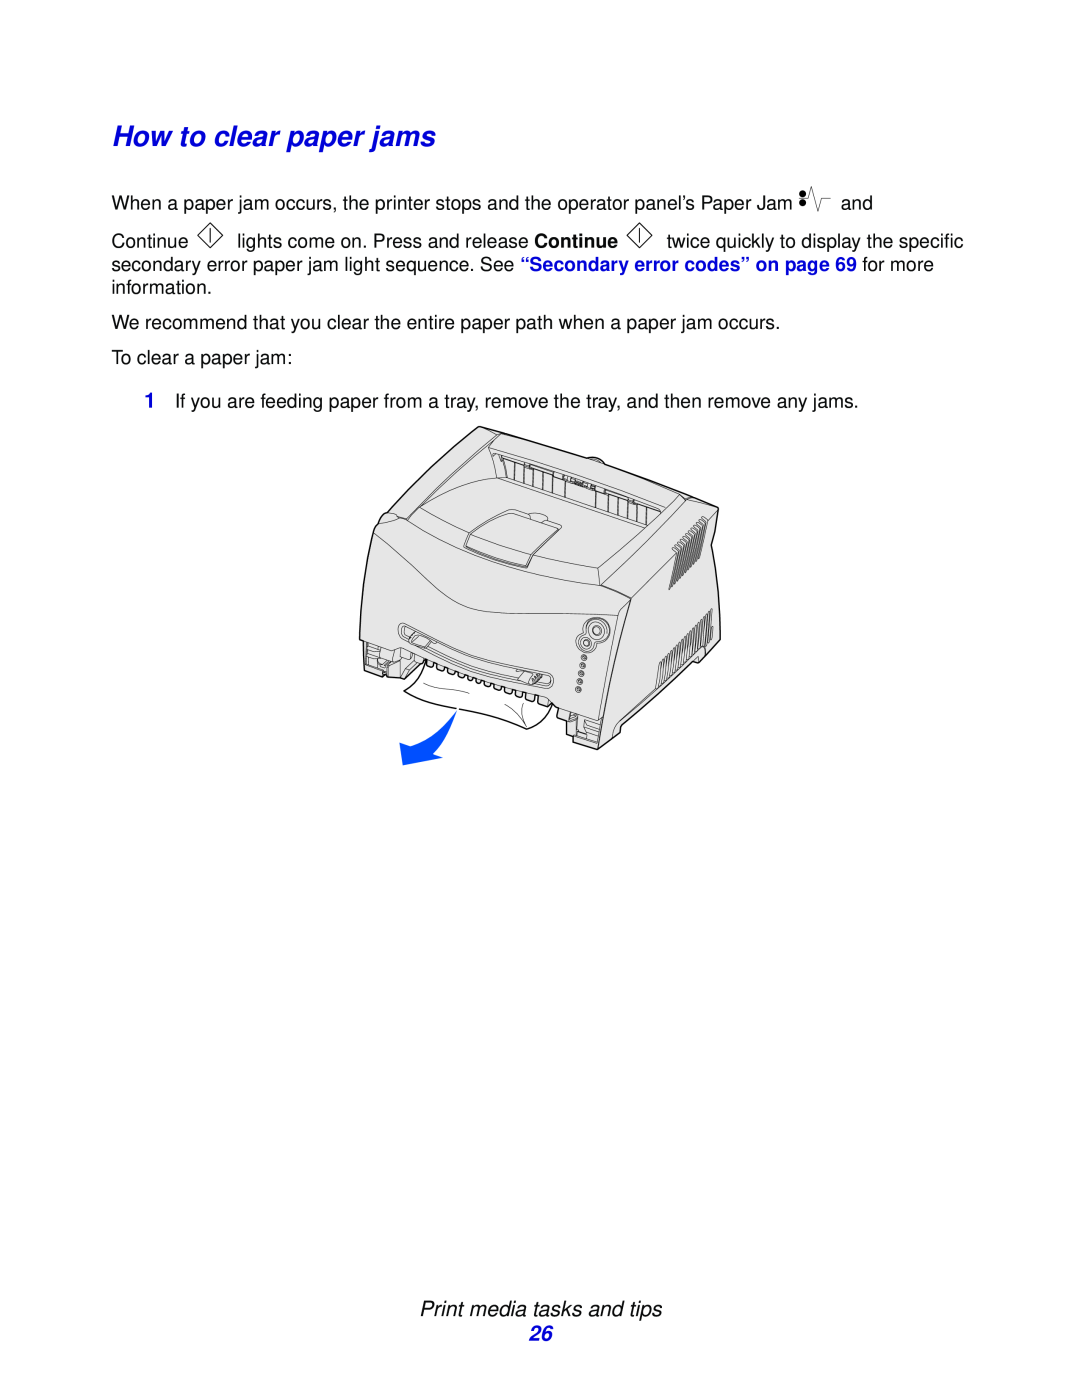 Lexmark 230, 232, E332n manual How to clear paper jams, Print media tasks and tips 